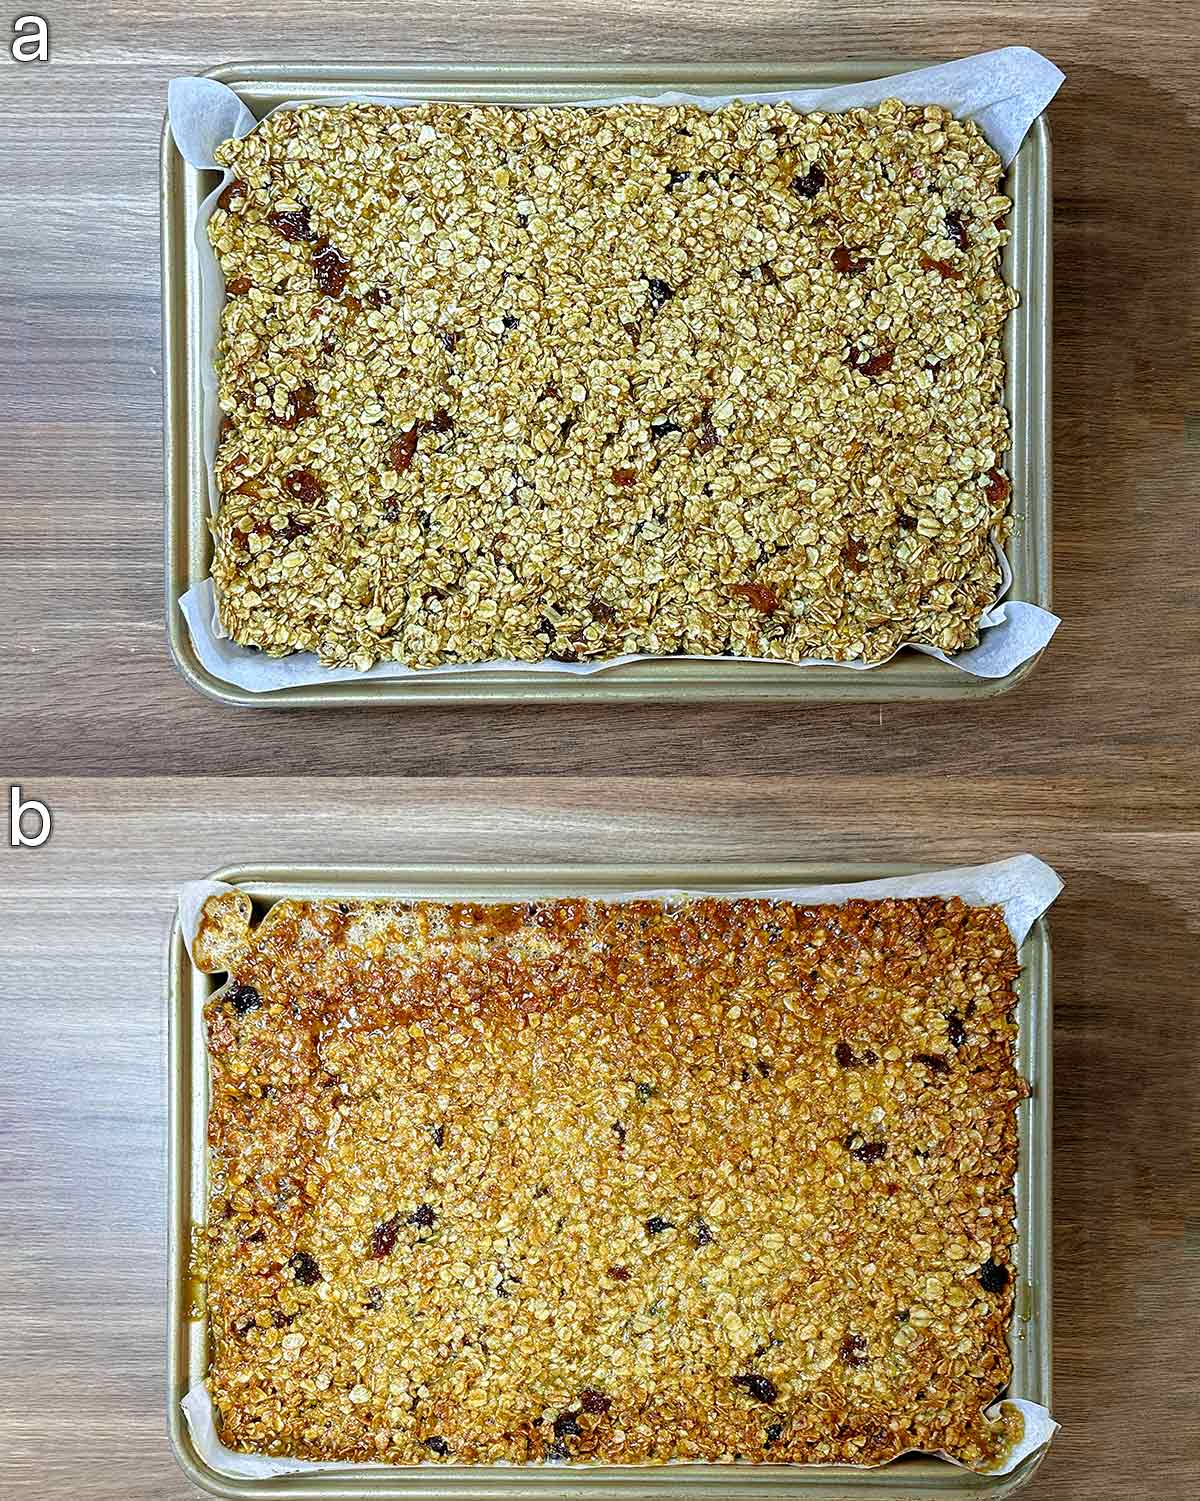 Two shot collage of the flapjack mixture pressed into a baking tin, then showing it fully cooked.